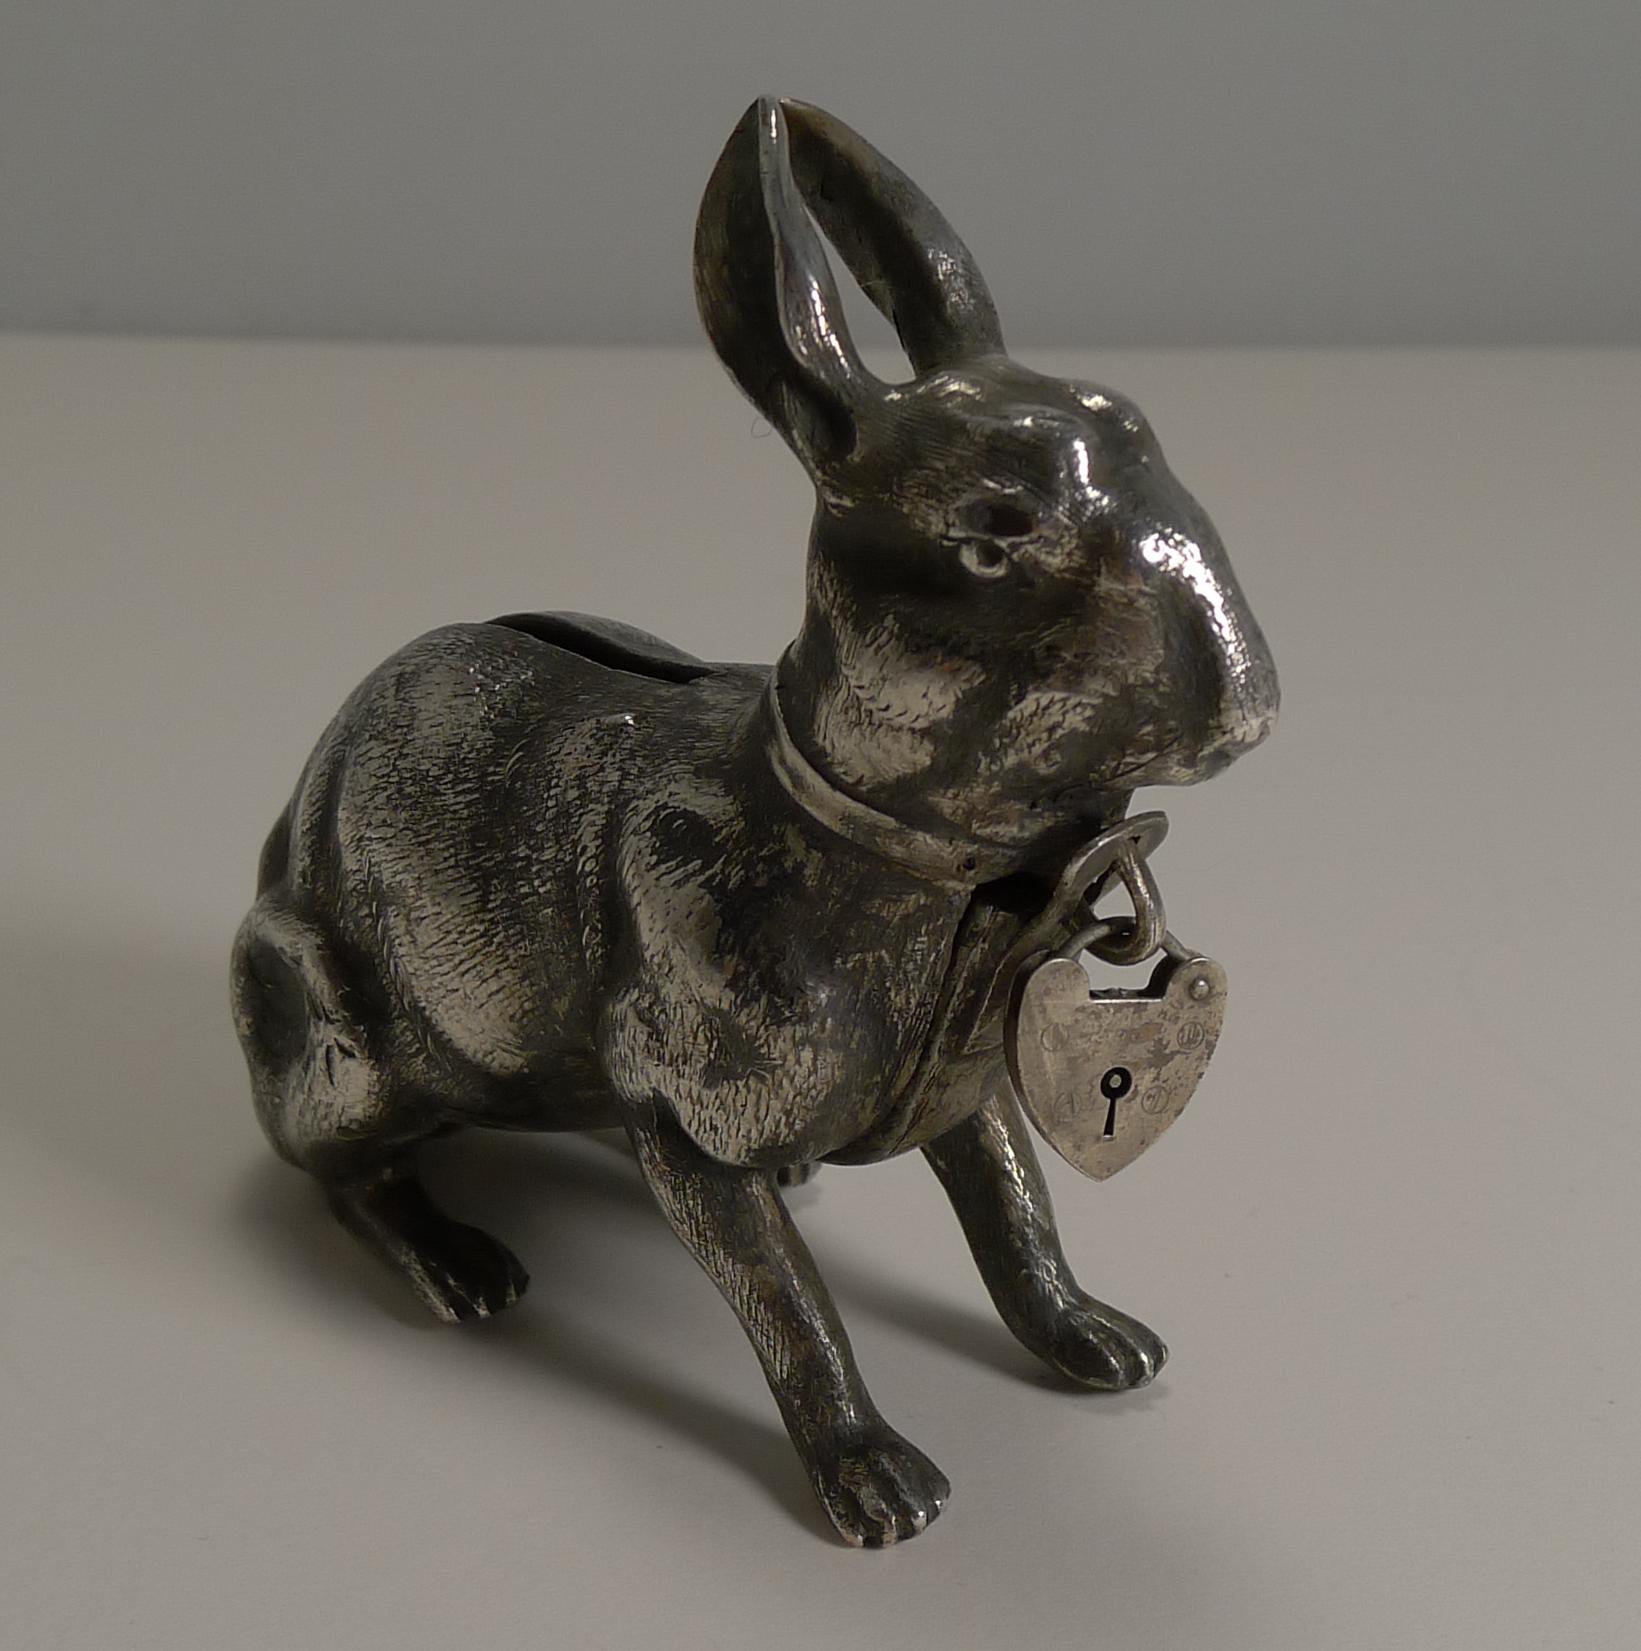 A highly sought-after and scarce little money box or bank in silver plate with a fabulous antique patina.

The box was made in the from of a Hare or Rabbit with a heart shaped lock to the front (these don't actually lock), the lock opens and snaps